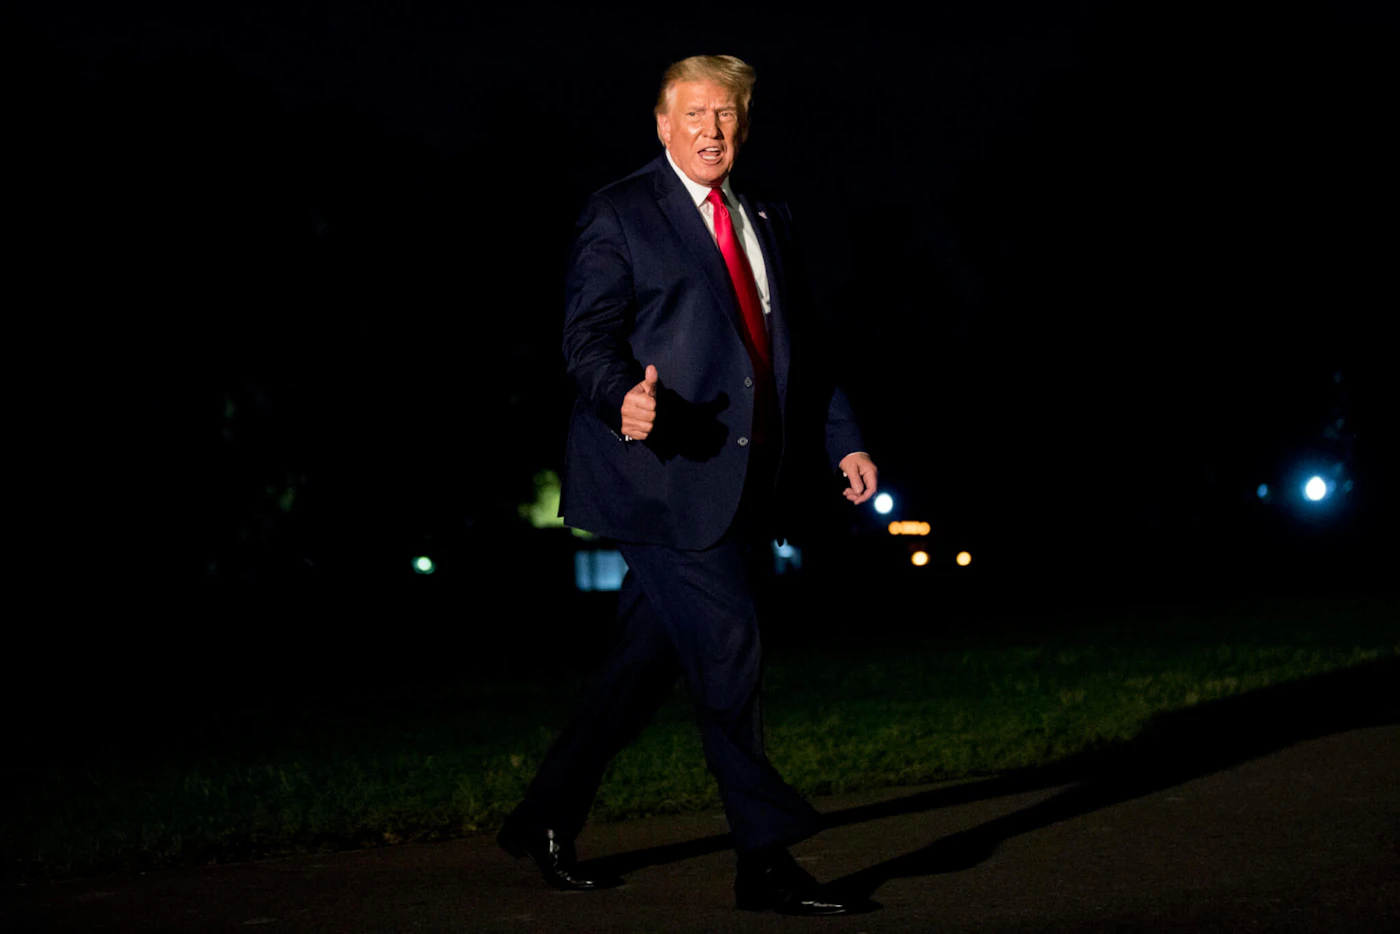 President Donald Trump gives a thumbs-up to members of the media as he walks across the South Lawn as he arrives at the White House in Washington, Sunday, Aug. 9, 2020, after returning from Morristown, N.J. (AP Photo/Andrew Harnik)